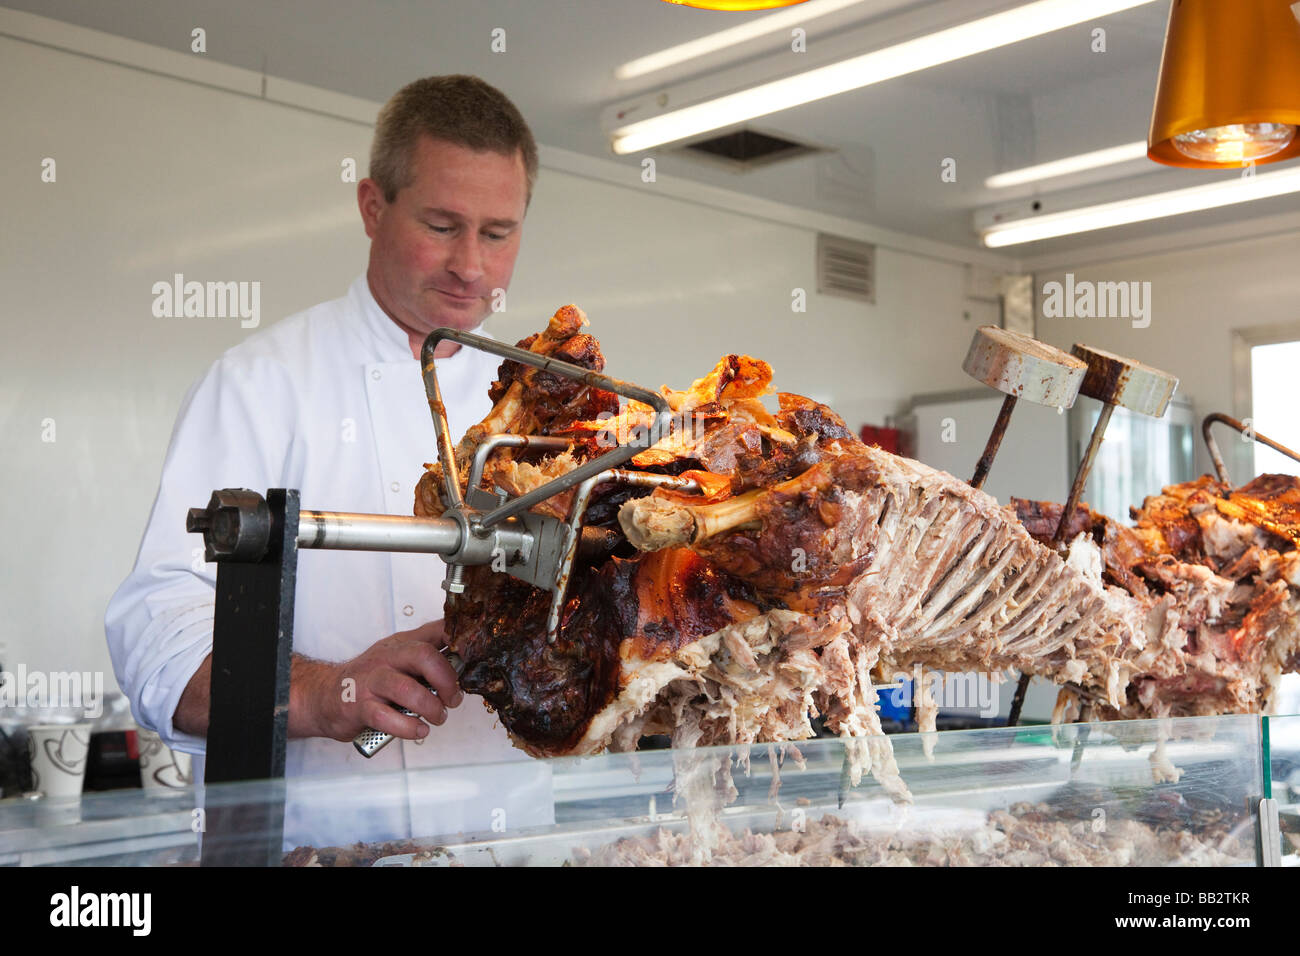 hog roast meat being cooked and served at a food stall Stock Photo